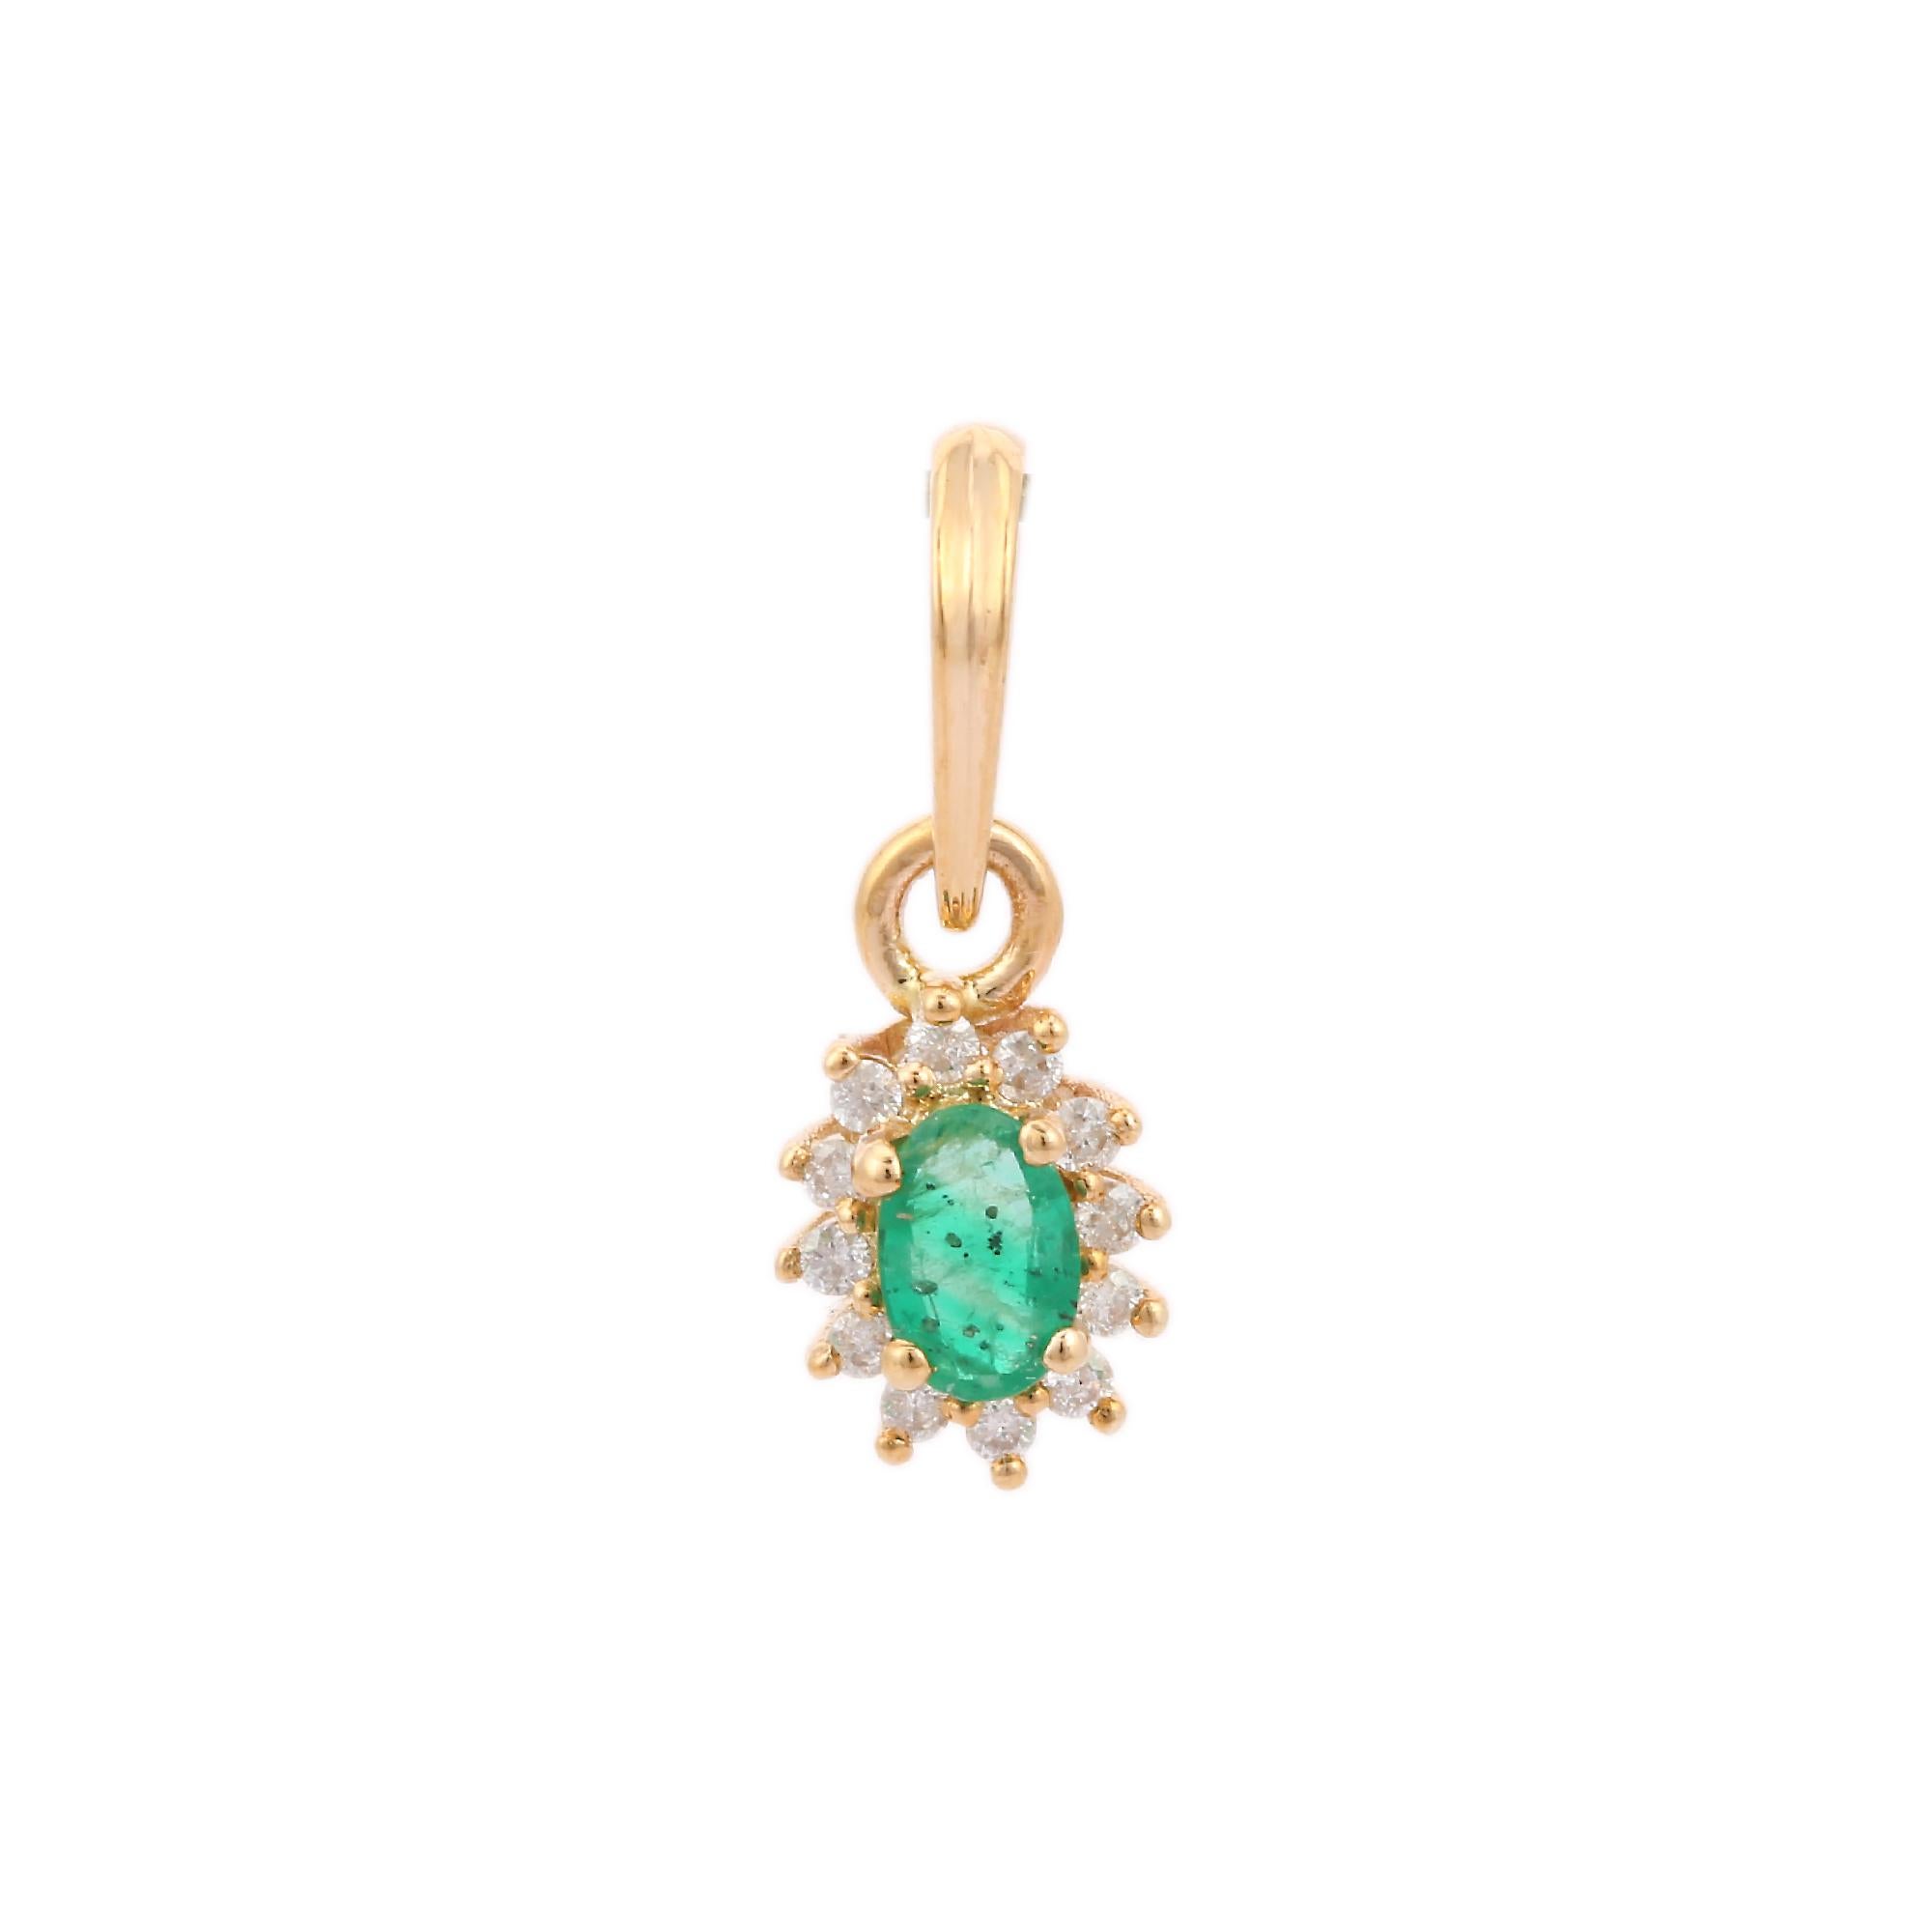 Natural Emerald and Halo Diamond Pendant in 14K Gold. It has a oval cut emerald studded with diamonds that completes your look with a decent touch. Pendants are used to wear or gifted to represent love and promises. It's an attractive jewelry piece